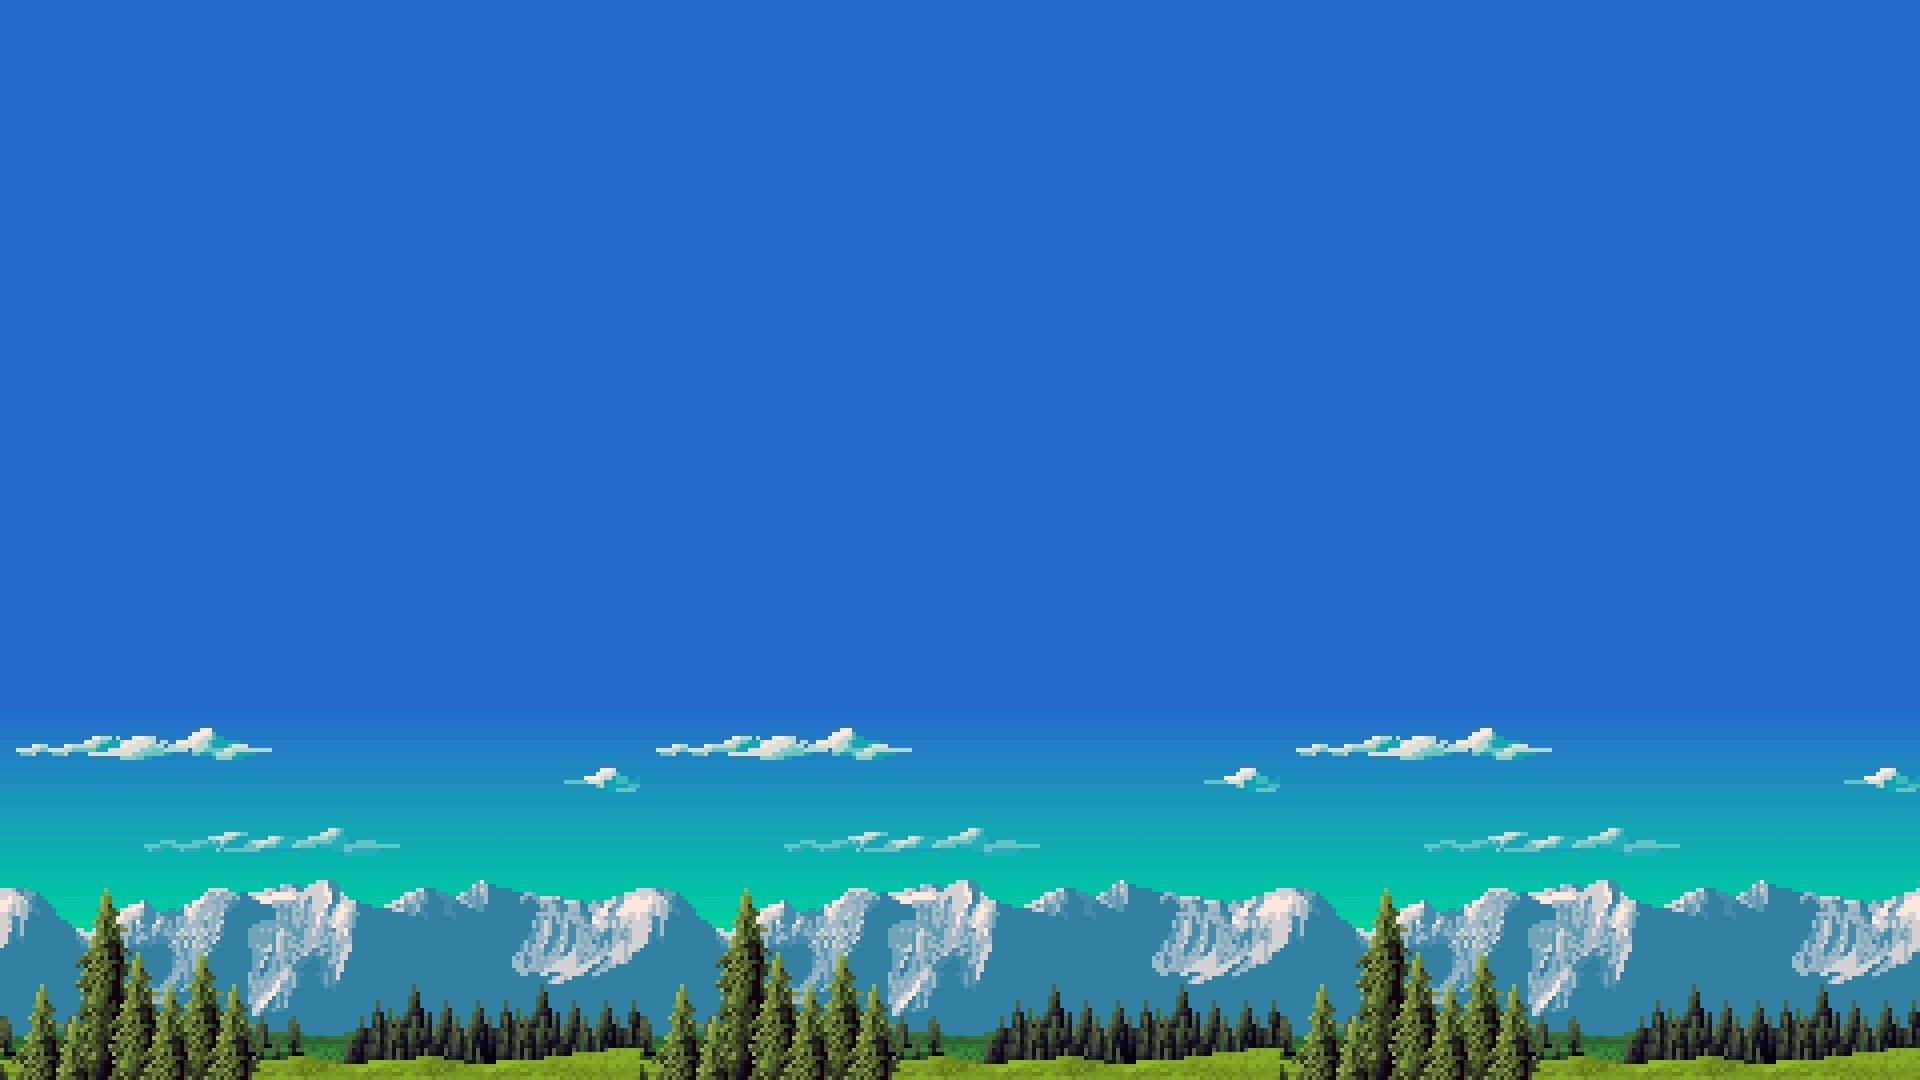 8 Bit 1920X1080 Wallpaper and Background Image